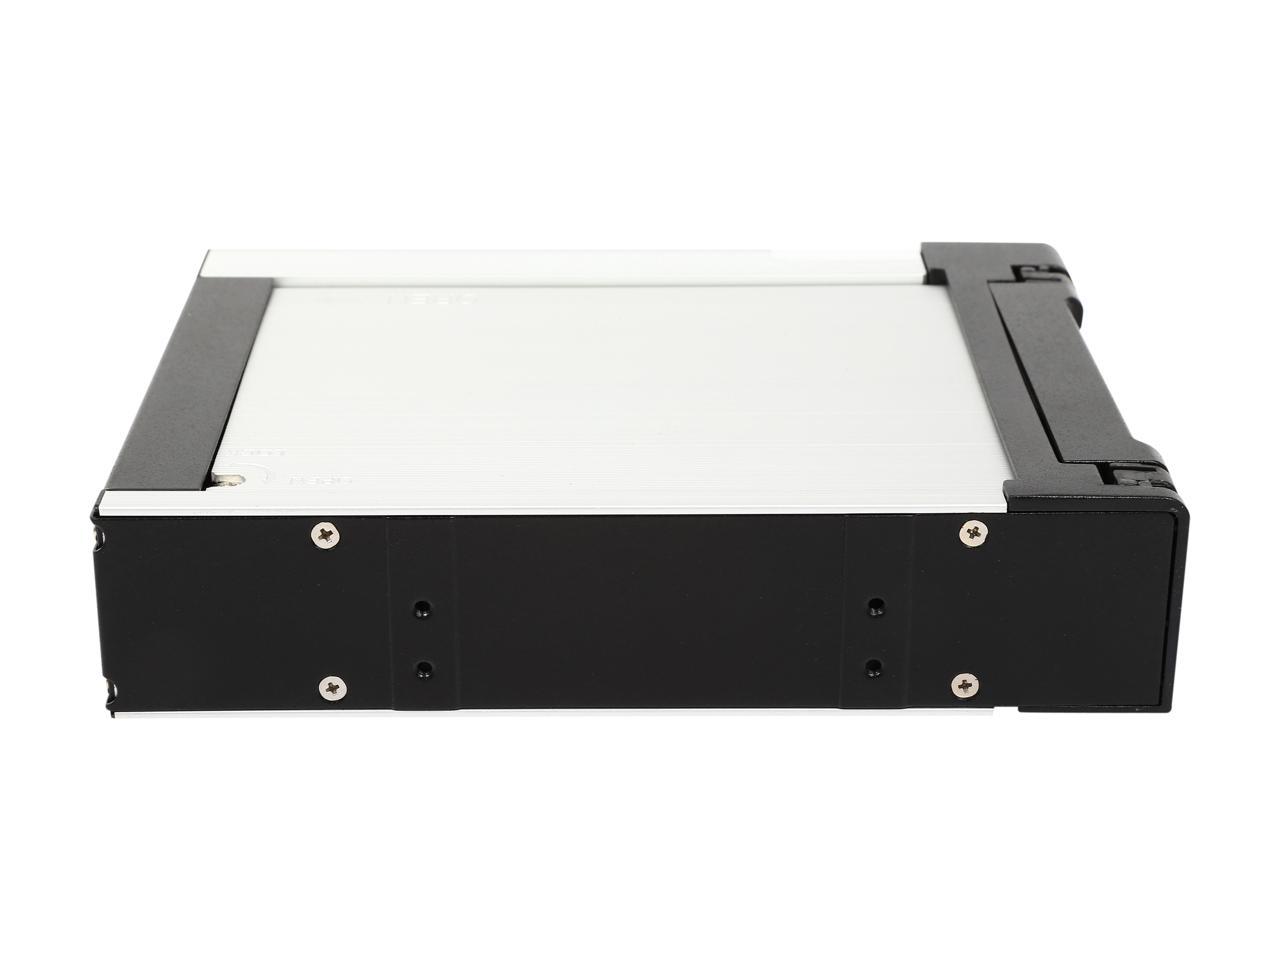 Athena Power MR-135AB 3.5" HDD Hot-Swap Mobile Rack Converts 1 x 5.25" to 1 x 3.5" SATA/SAS 6Gb/s HDD - Aluminum Cage & Tray w/ Dual Function Keylock, LED Indicator & 1 x 40mm Fan - OEM